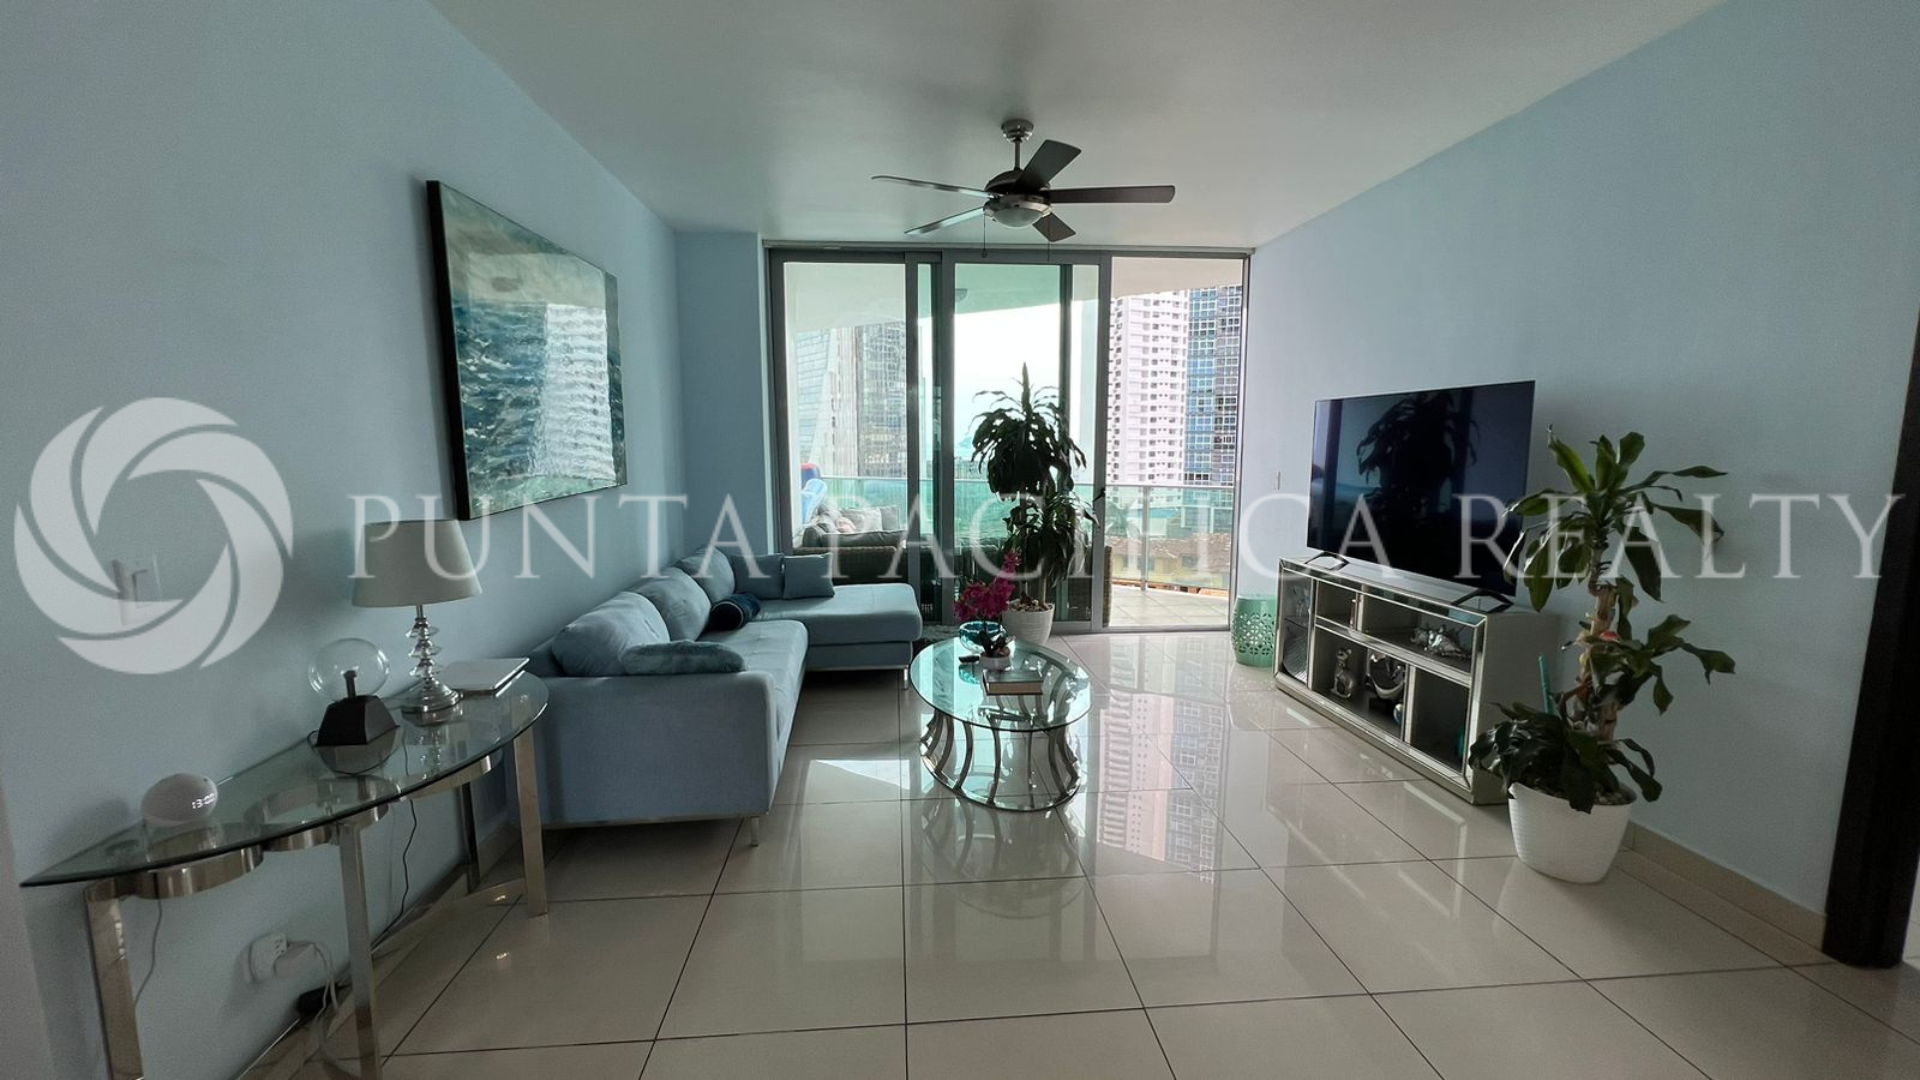 For Sale | 2-Bedroom Apartment | Investment Opportunity | Fully ...